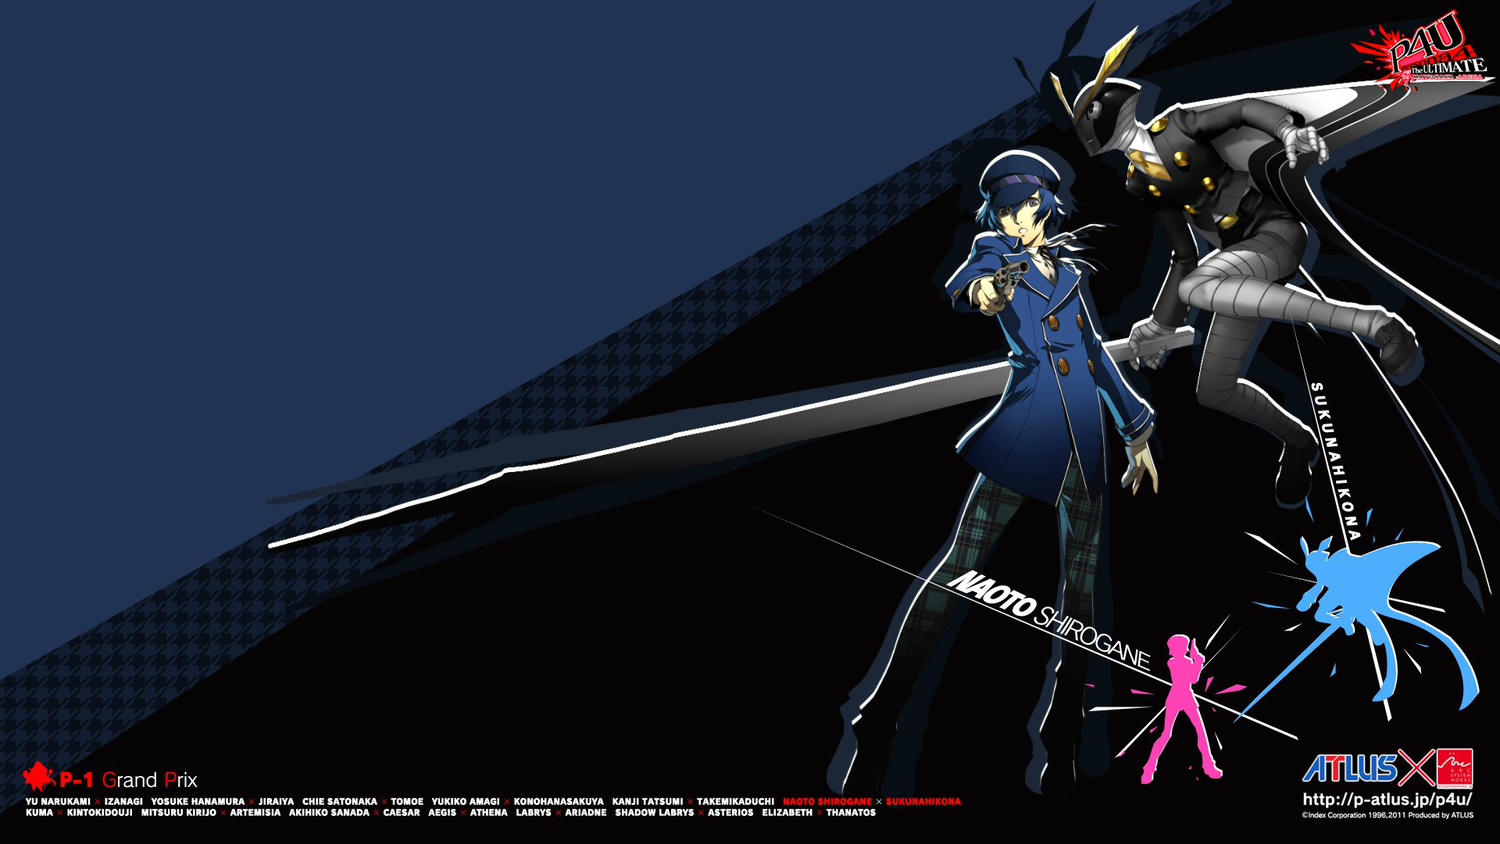 Persona 4: Arena Picture - Image Abyss